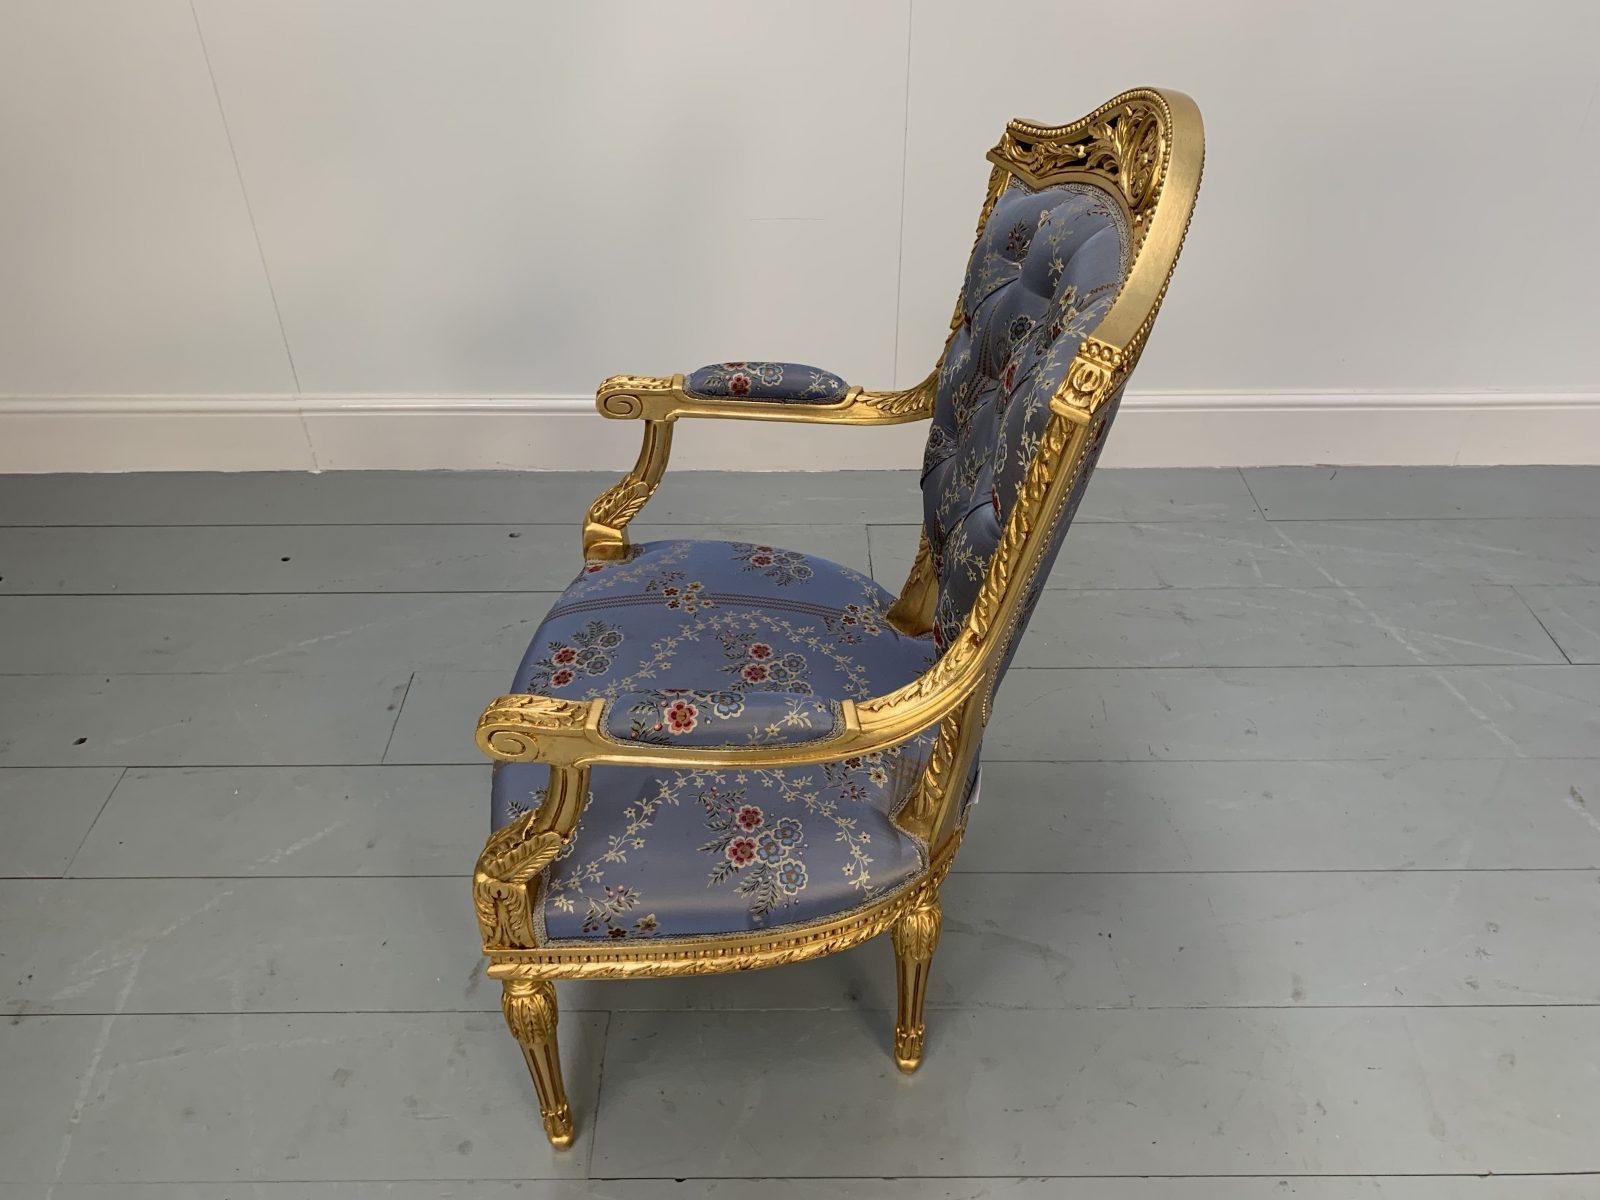 Contemporary Asnaghi Fauteuil Baroque Rococo Armchair in Floral Silk and Gilt For Sale